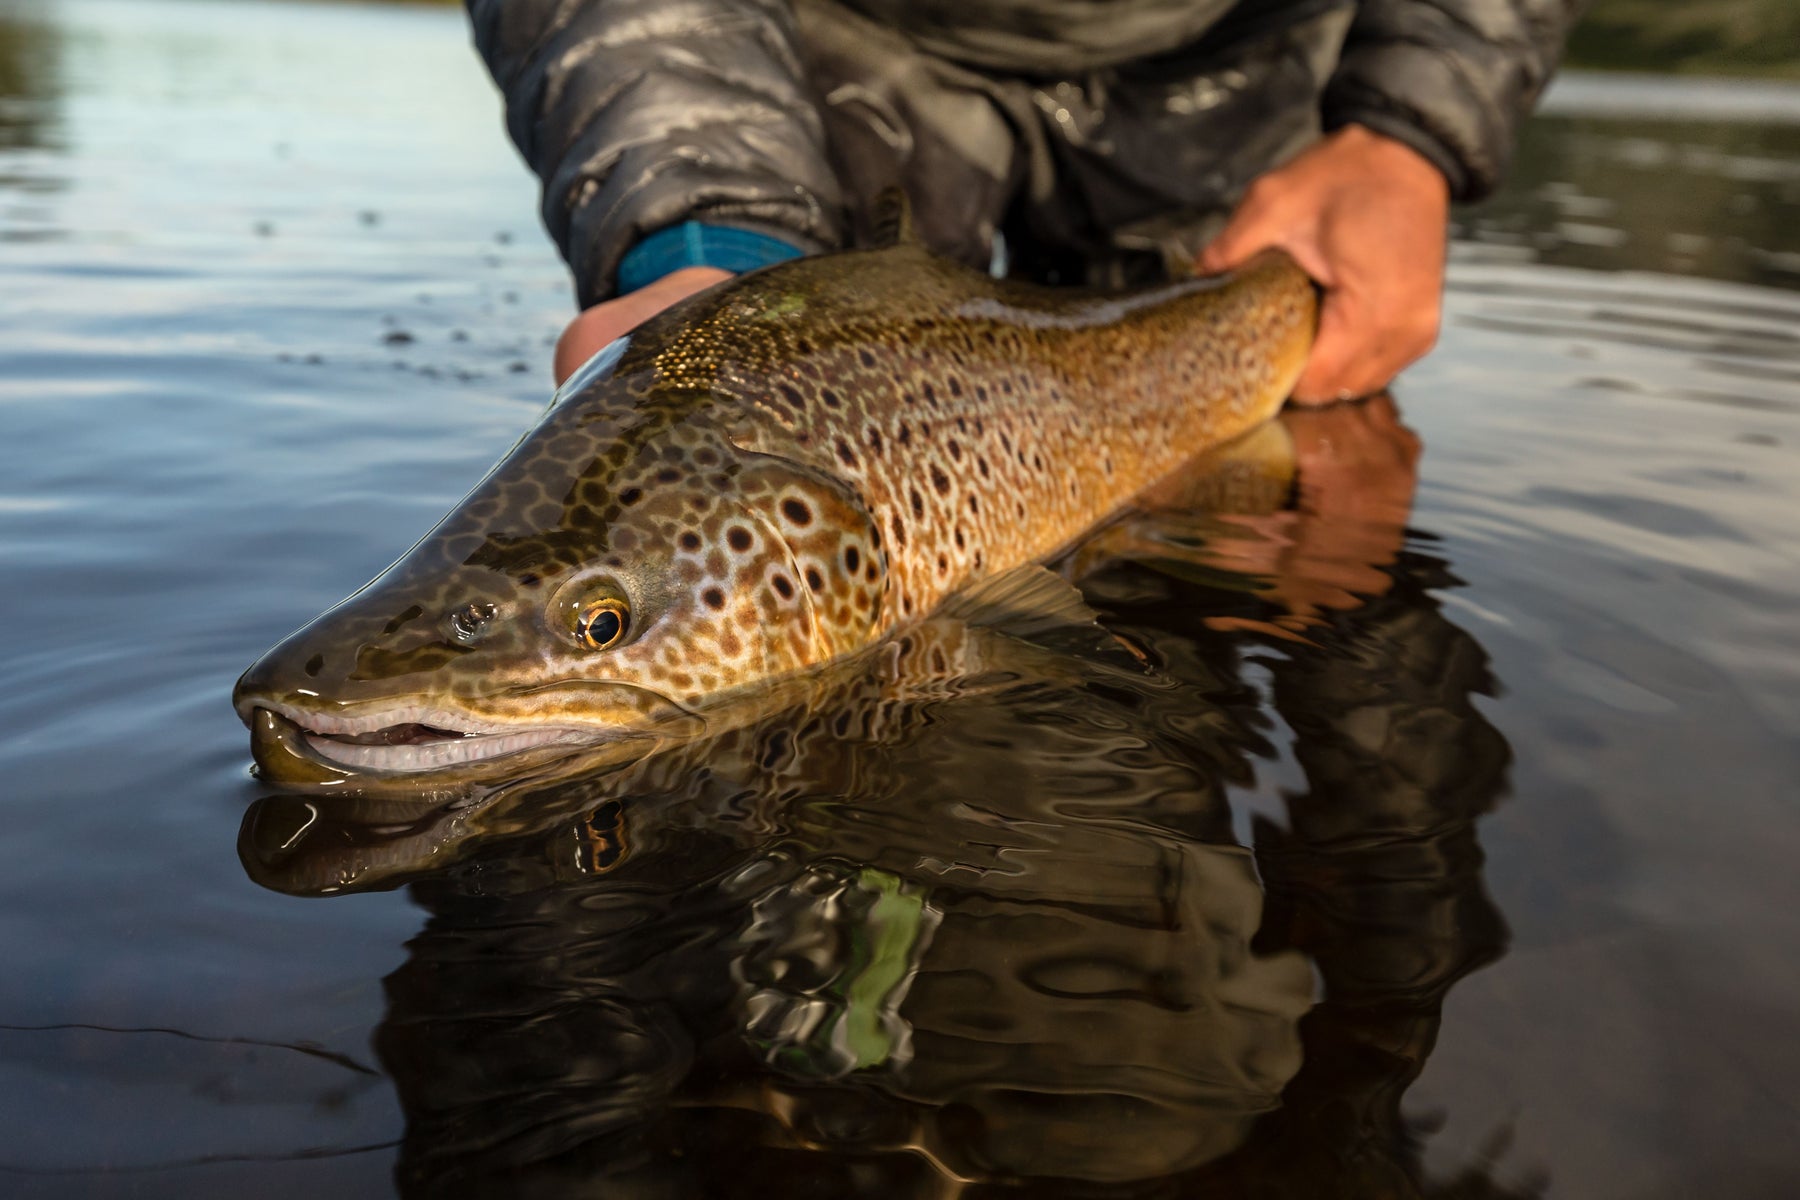 Krystal Flash - Guided Fly Fishing Madison River, Lodging